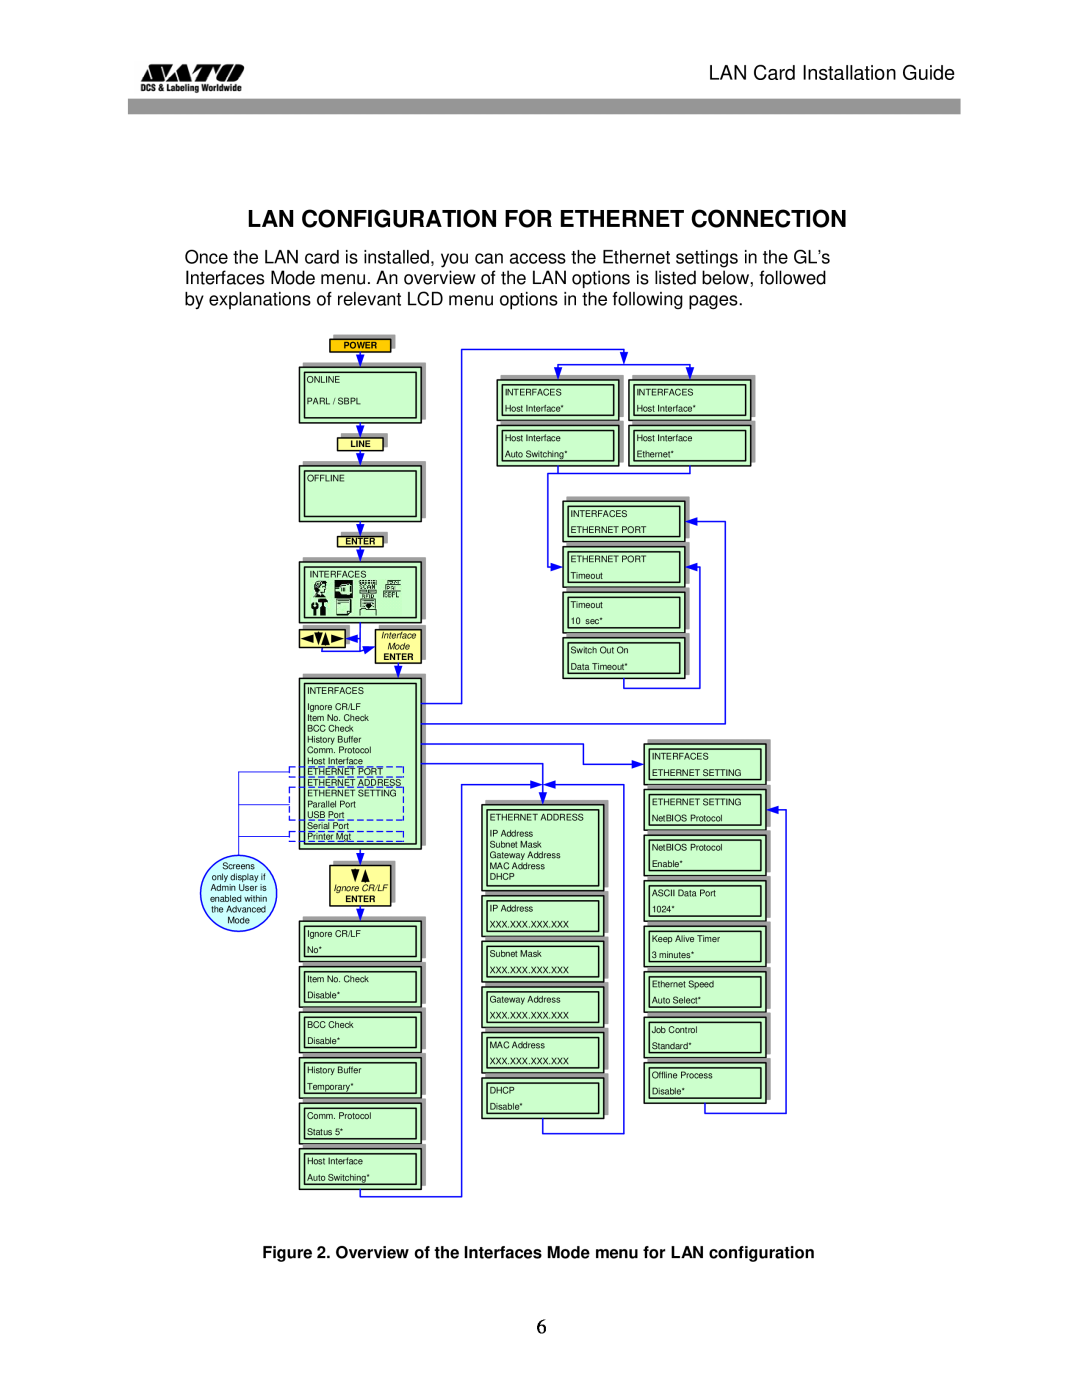 SATO GL 4xxe Series Lan Configuration For Ethernet Connection, Overview of the Interfaces Mode menu for LAN configuration 